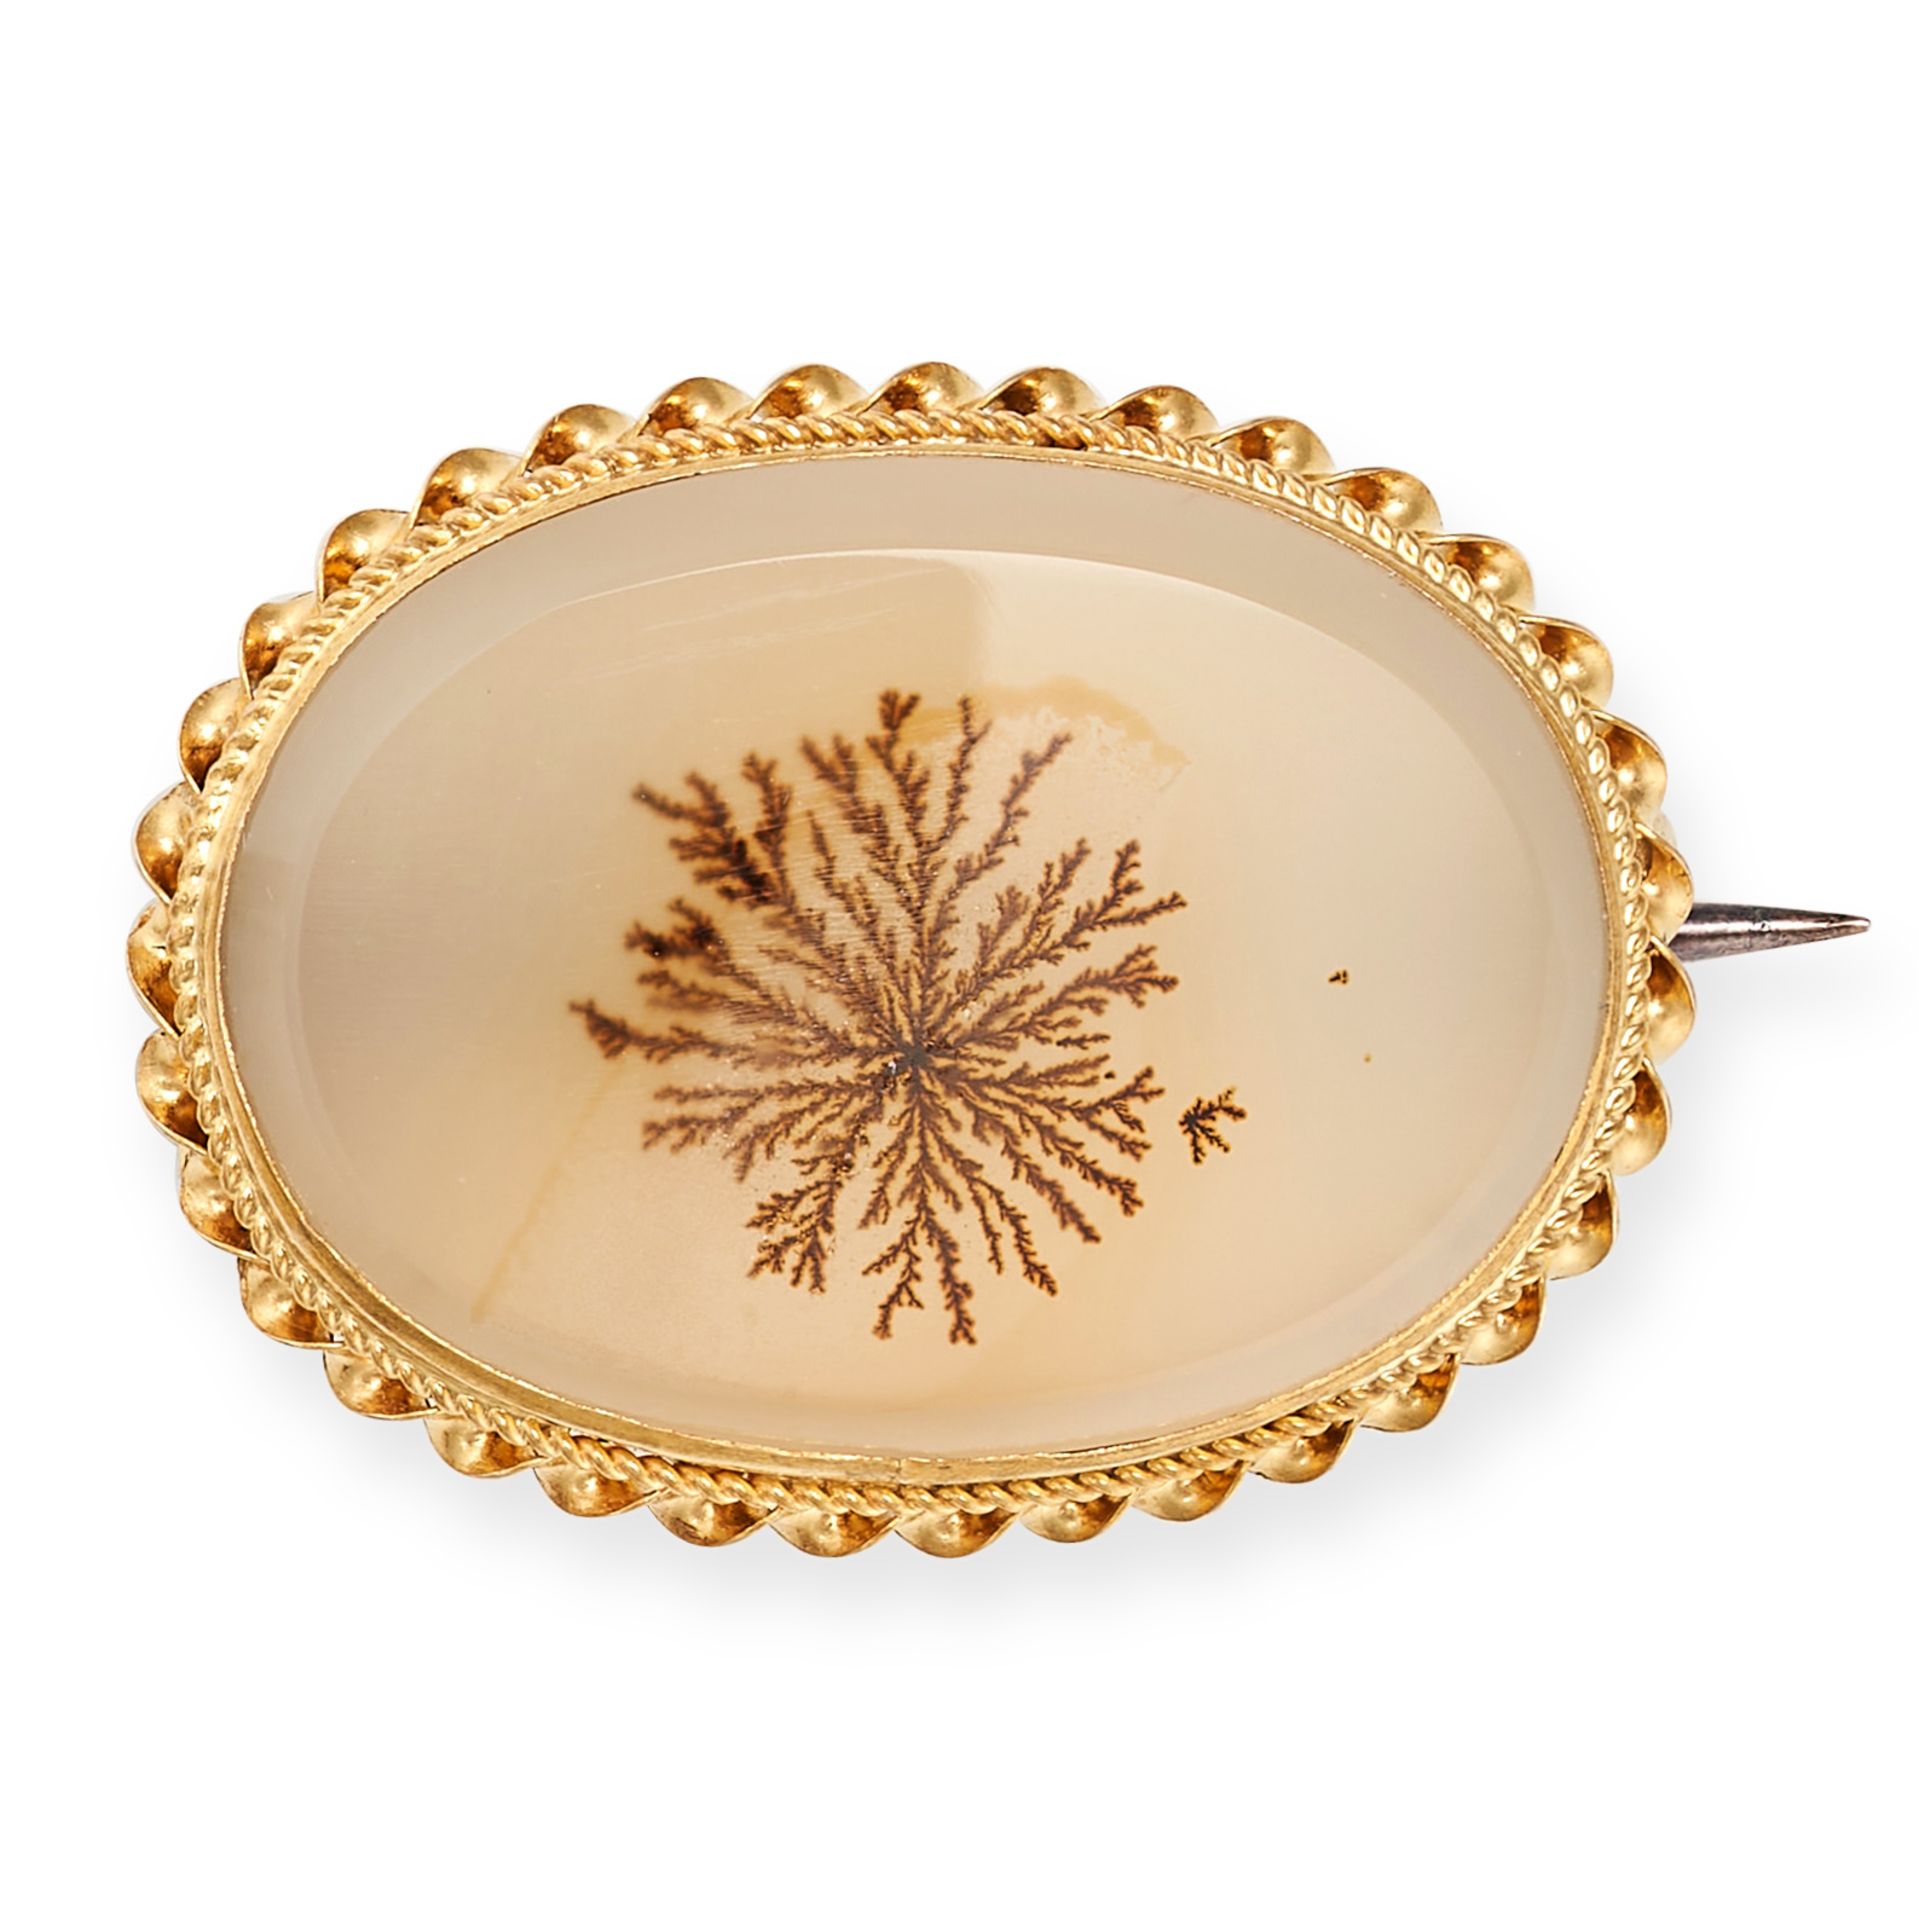 AN ANTIQUE DENDRITIC AGATE BROOCH in yellow gold, set with an oval dendritic agate in a twisted g...